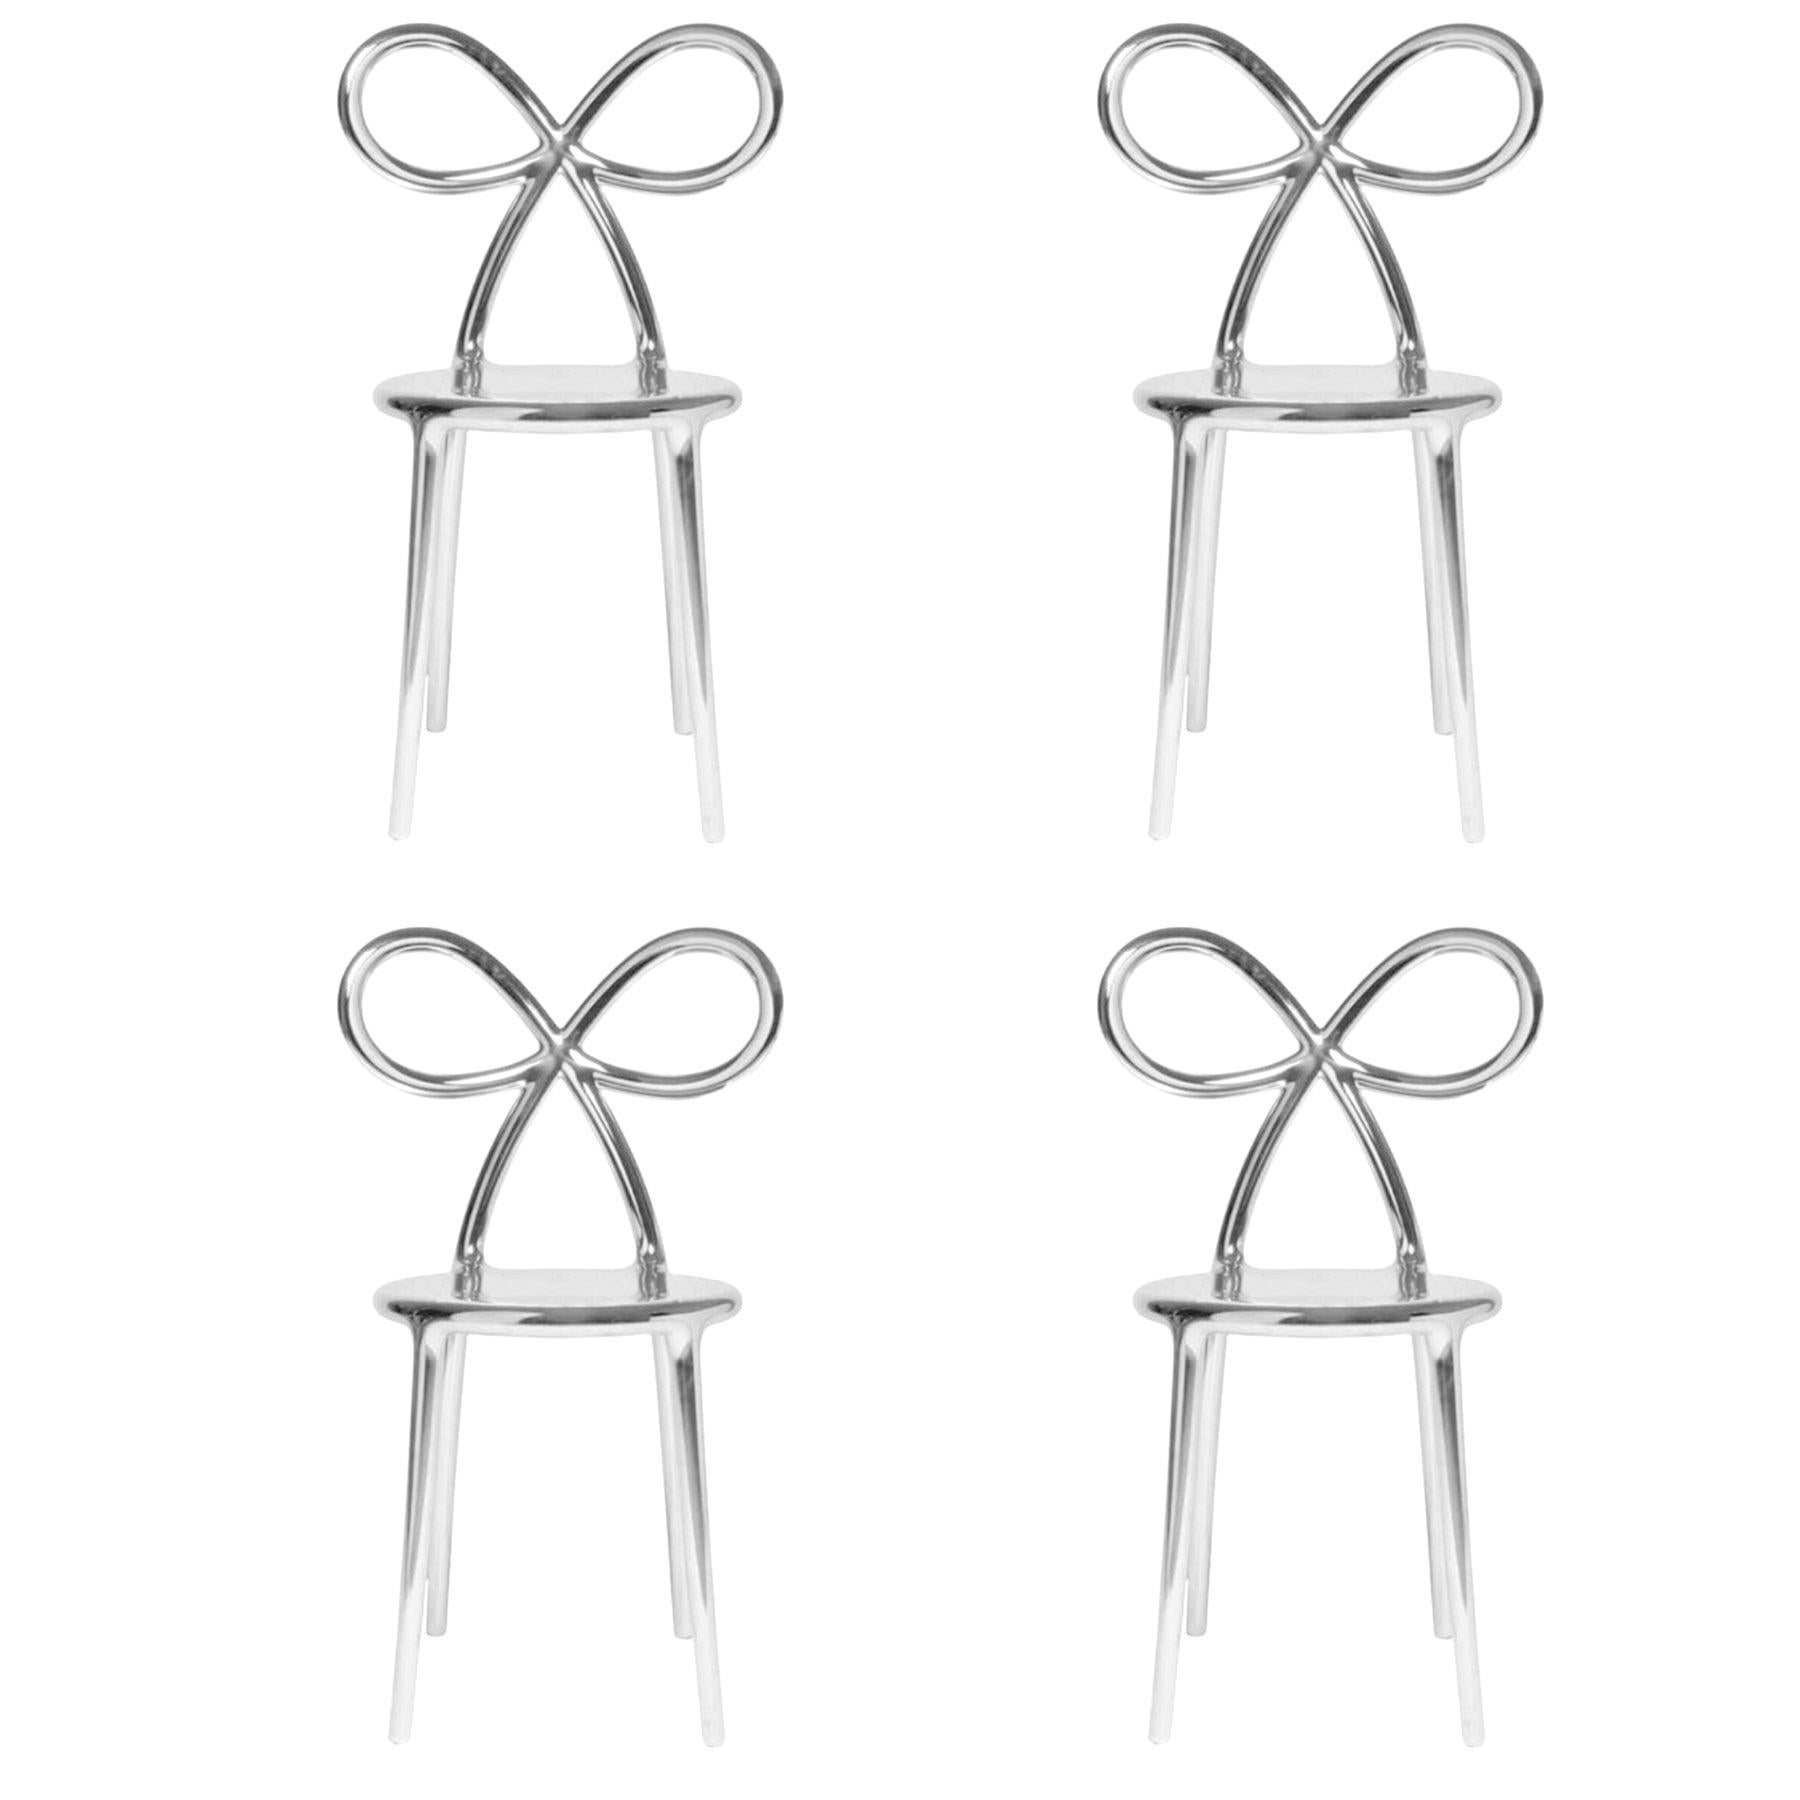 Set of 4 Silver Metallic Ribbon Chairs by Nika Zupanc, Made in Italy For Sale